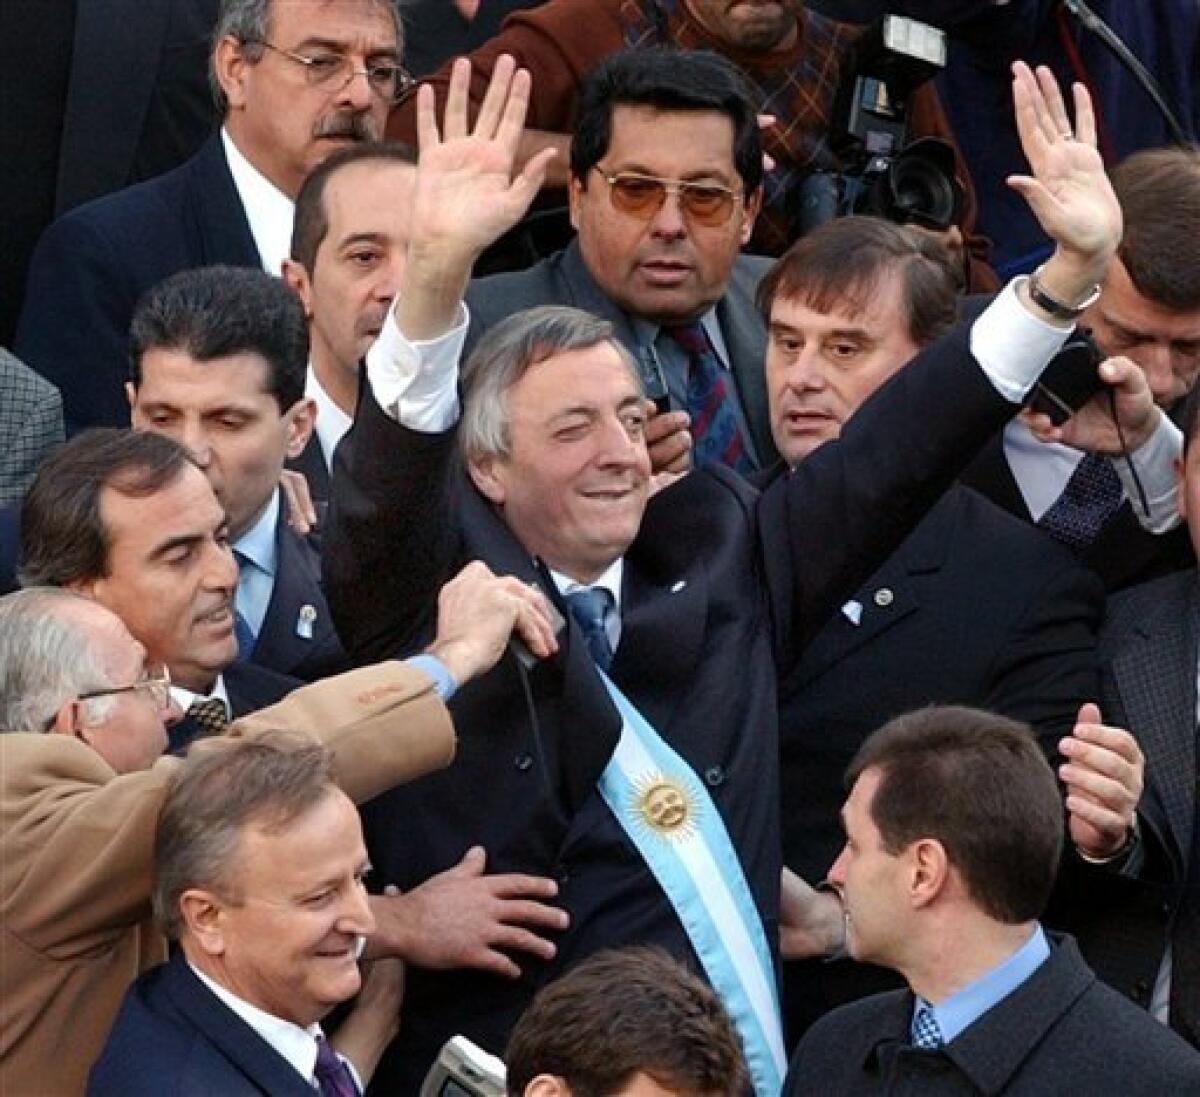 FILE - In this May 25, 2003 file photo, Argentina's President Nestor Kirchner waves to supporters after being sworn-in at Congress in Buenos Aires, Argentina. According to state television in Argentina, Nestor Kirchner died on Wednesday Oct. 27, 2010 after suffering heart attacks at age 60. Kirchner served as president from 2003-2007. (AP Photo/Natacha Pisarenko, File)